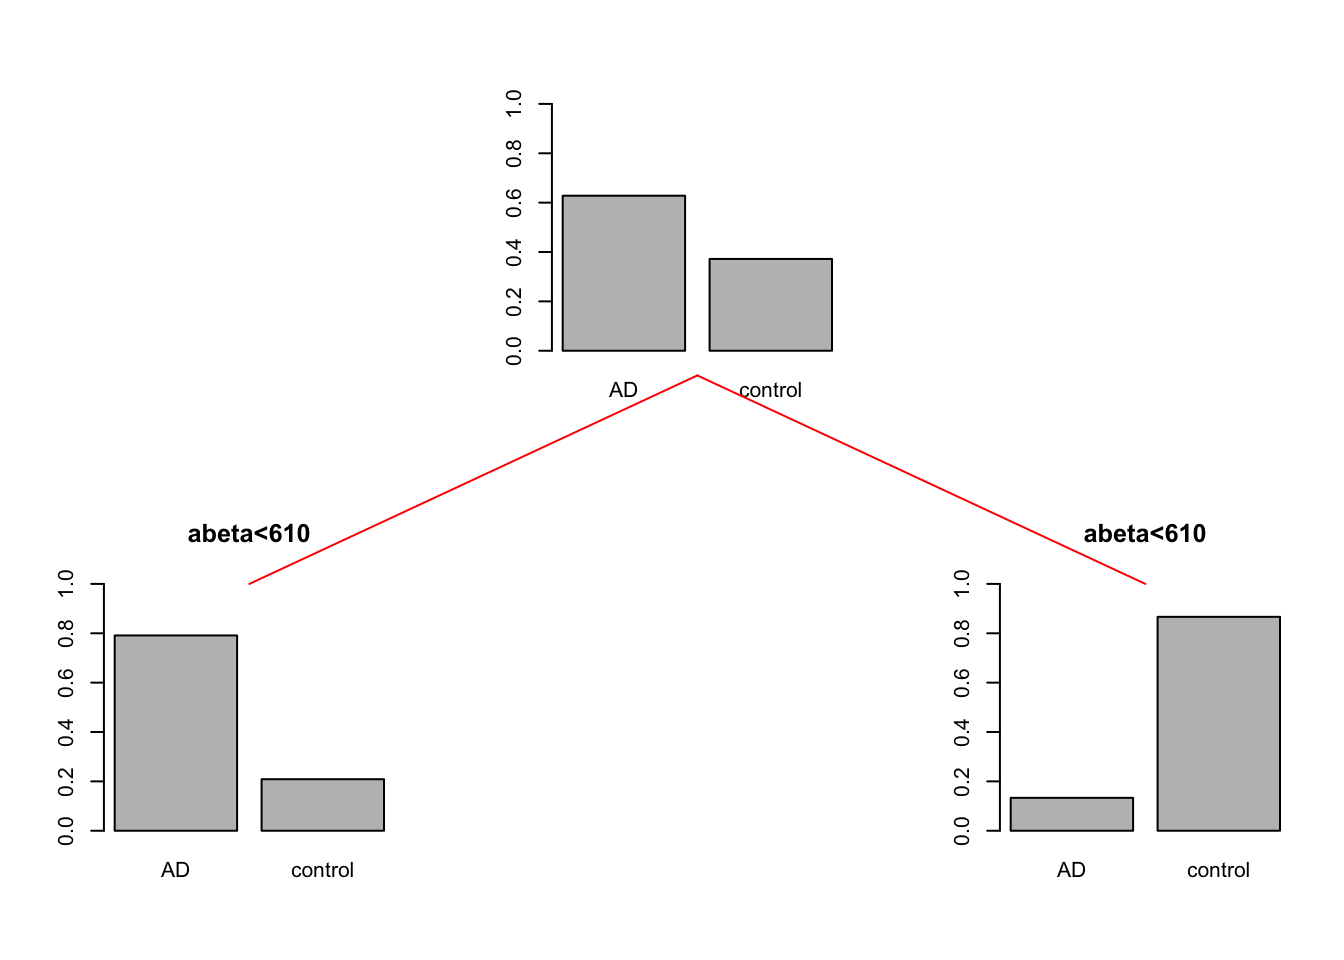 The example of two variables measured on a number of samples. Cut on abeta=610. The top plot shows all the data. The left figure shows the data points where abeta is <610 and the right plot shows the data points with abeta >=610